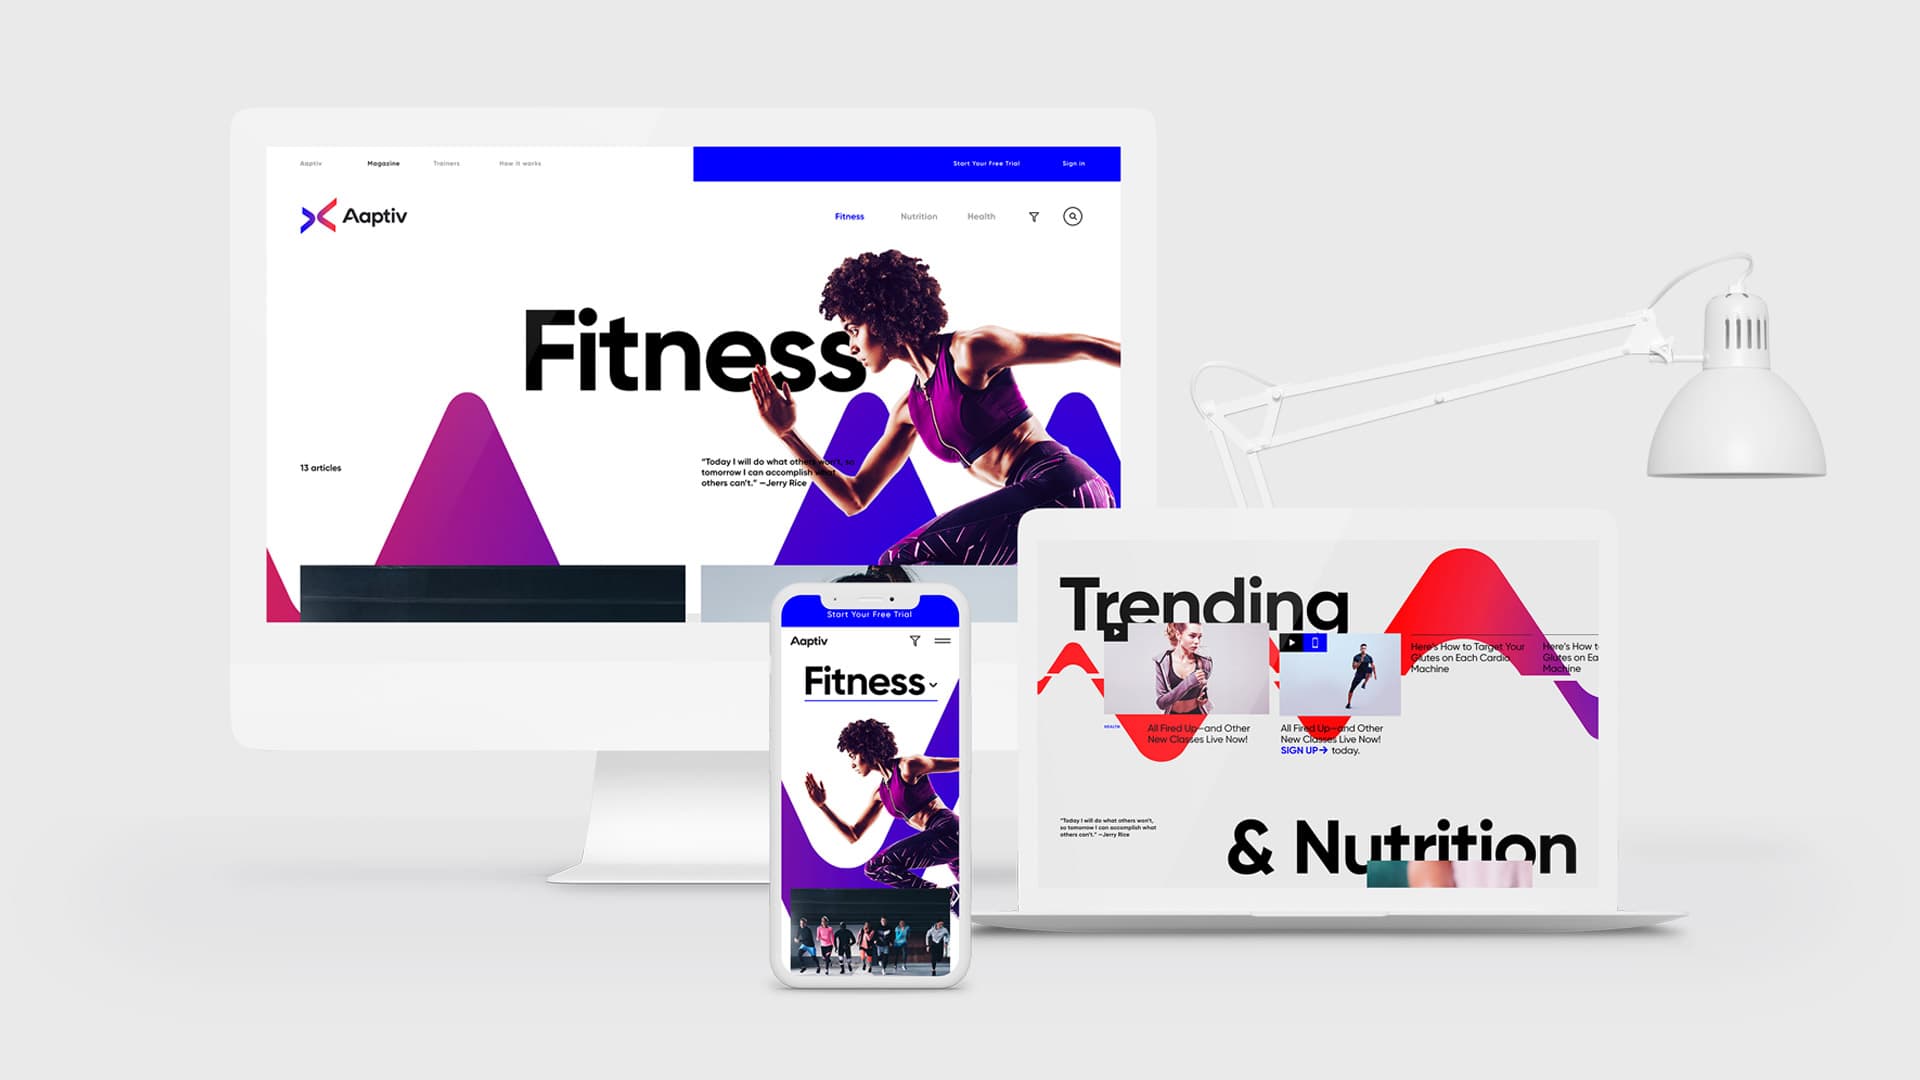 crafted-transformed-the-fitness-app-aaptiv-for-a-better-experience-new-aesthetics